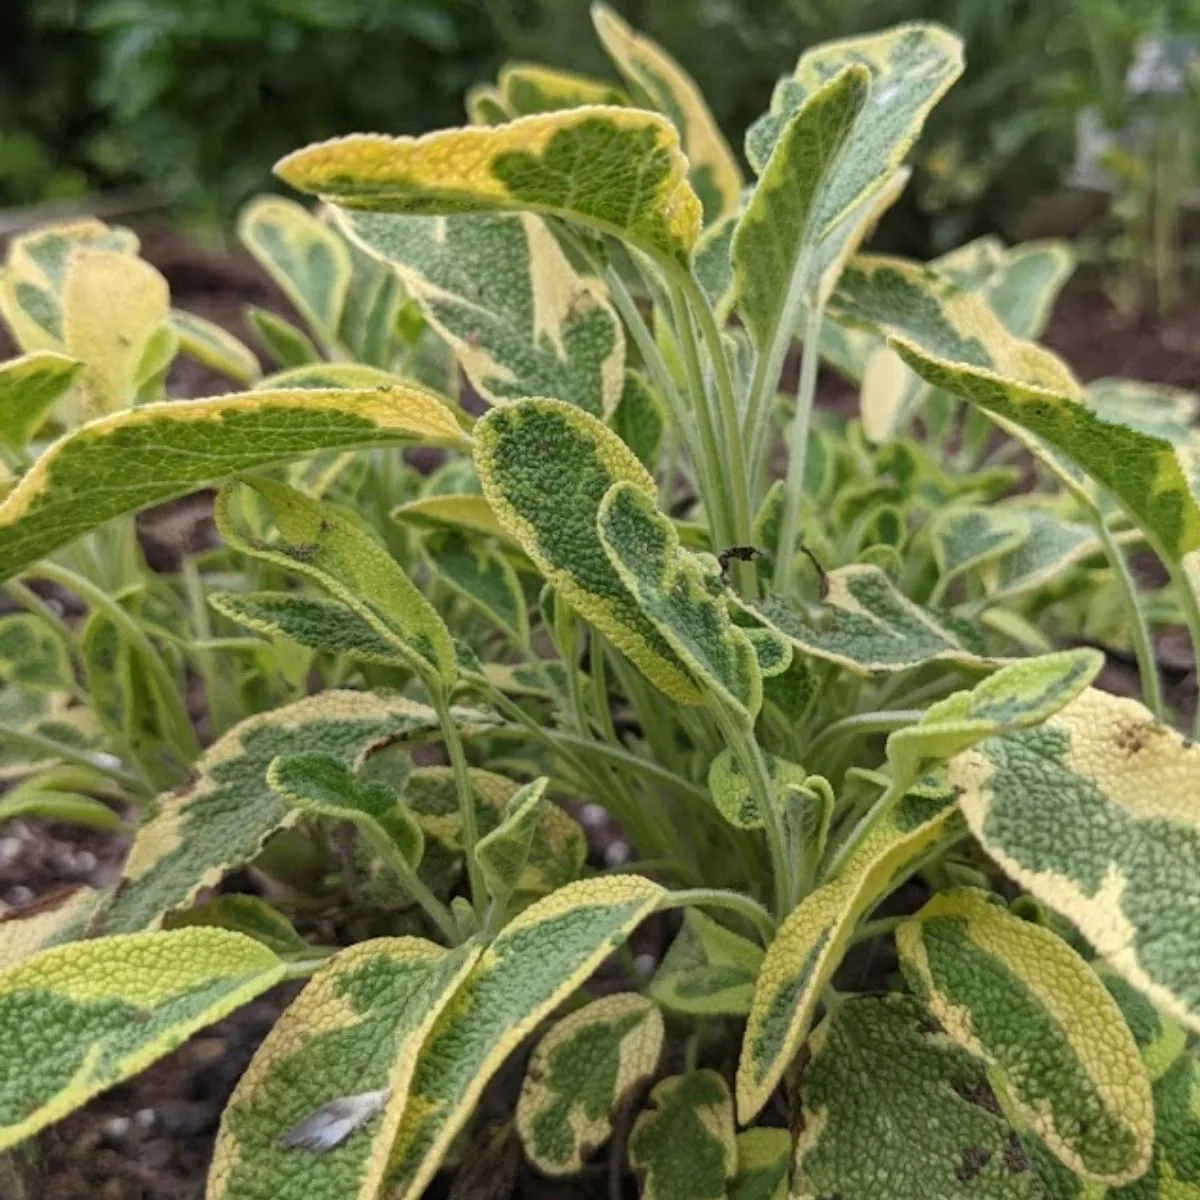 bicolor (green and yellow) sage